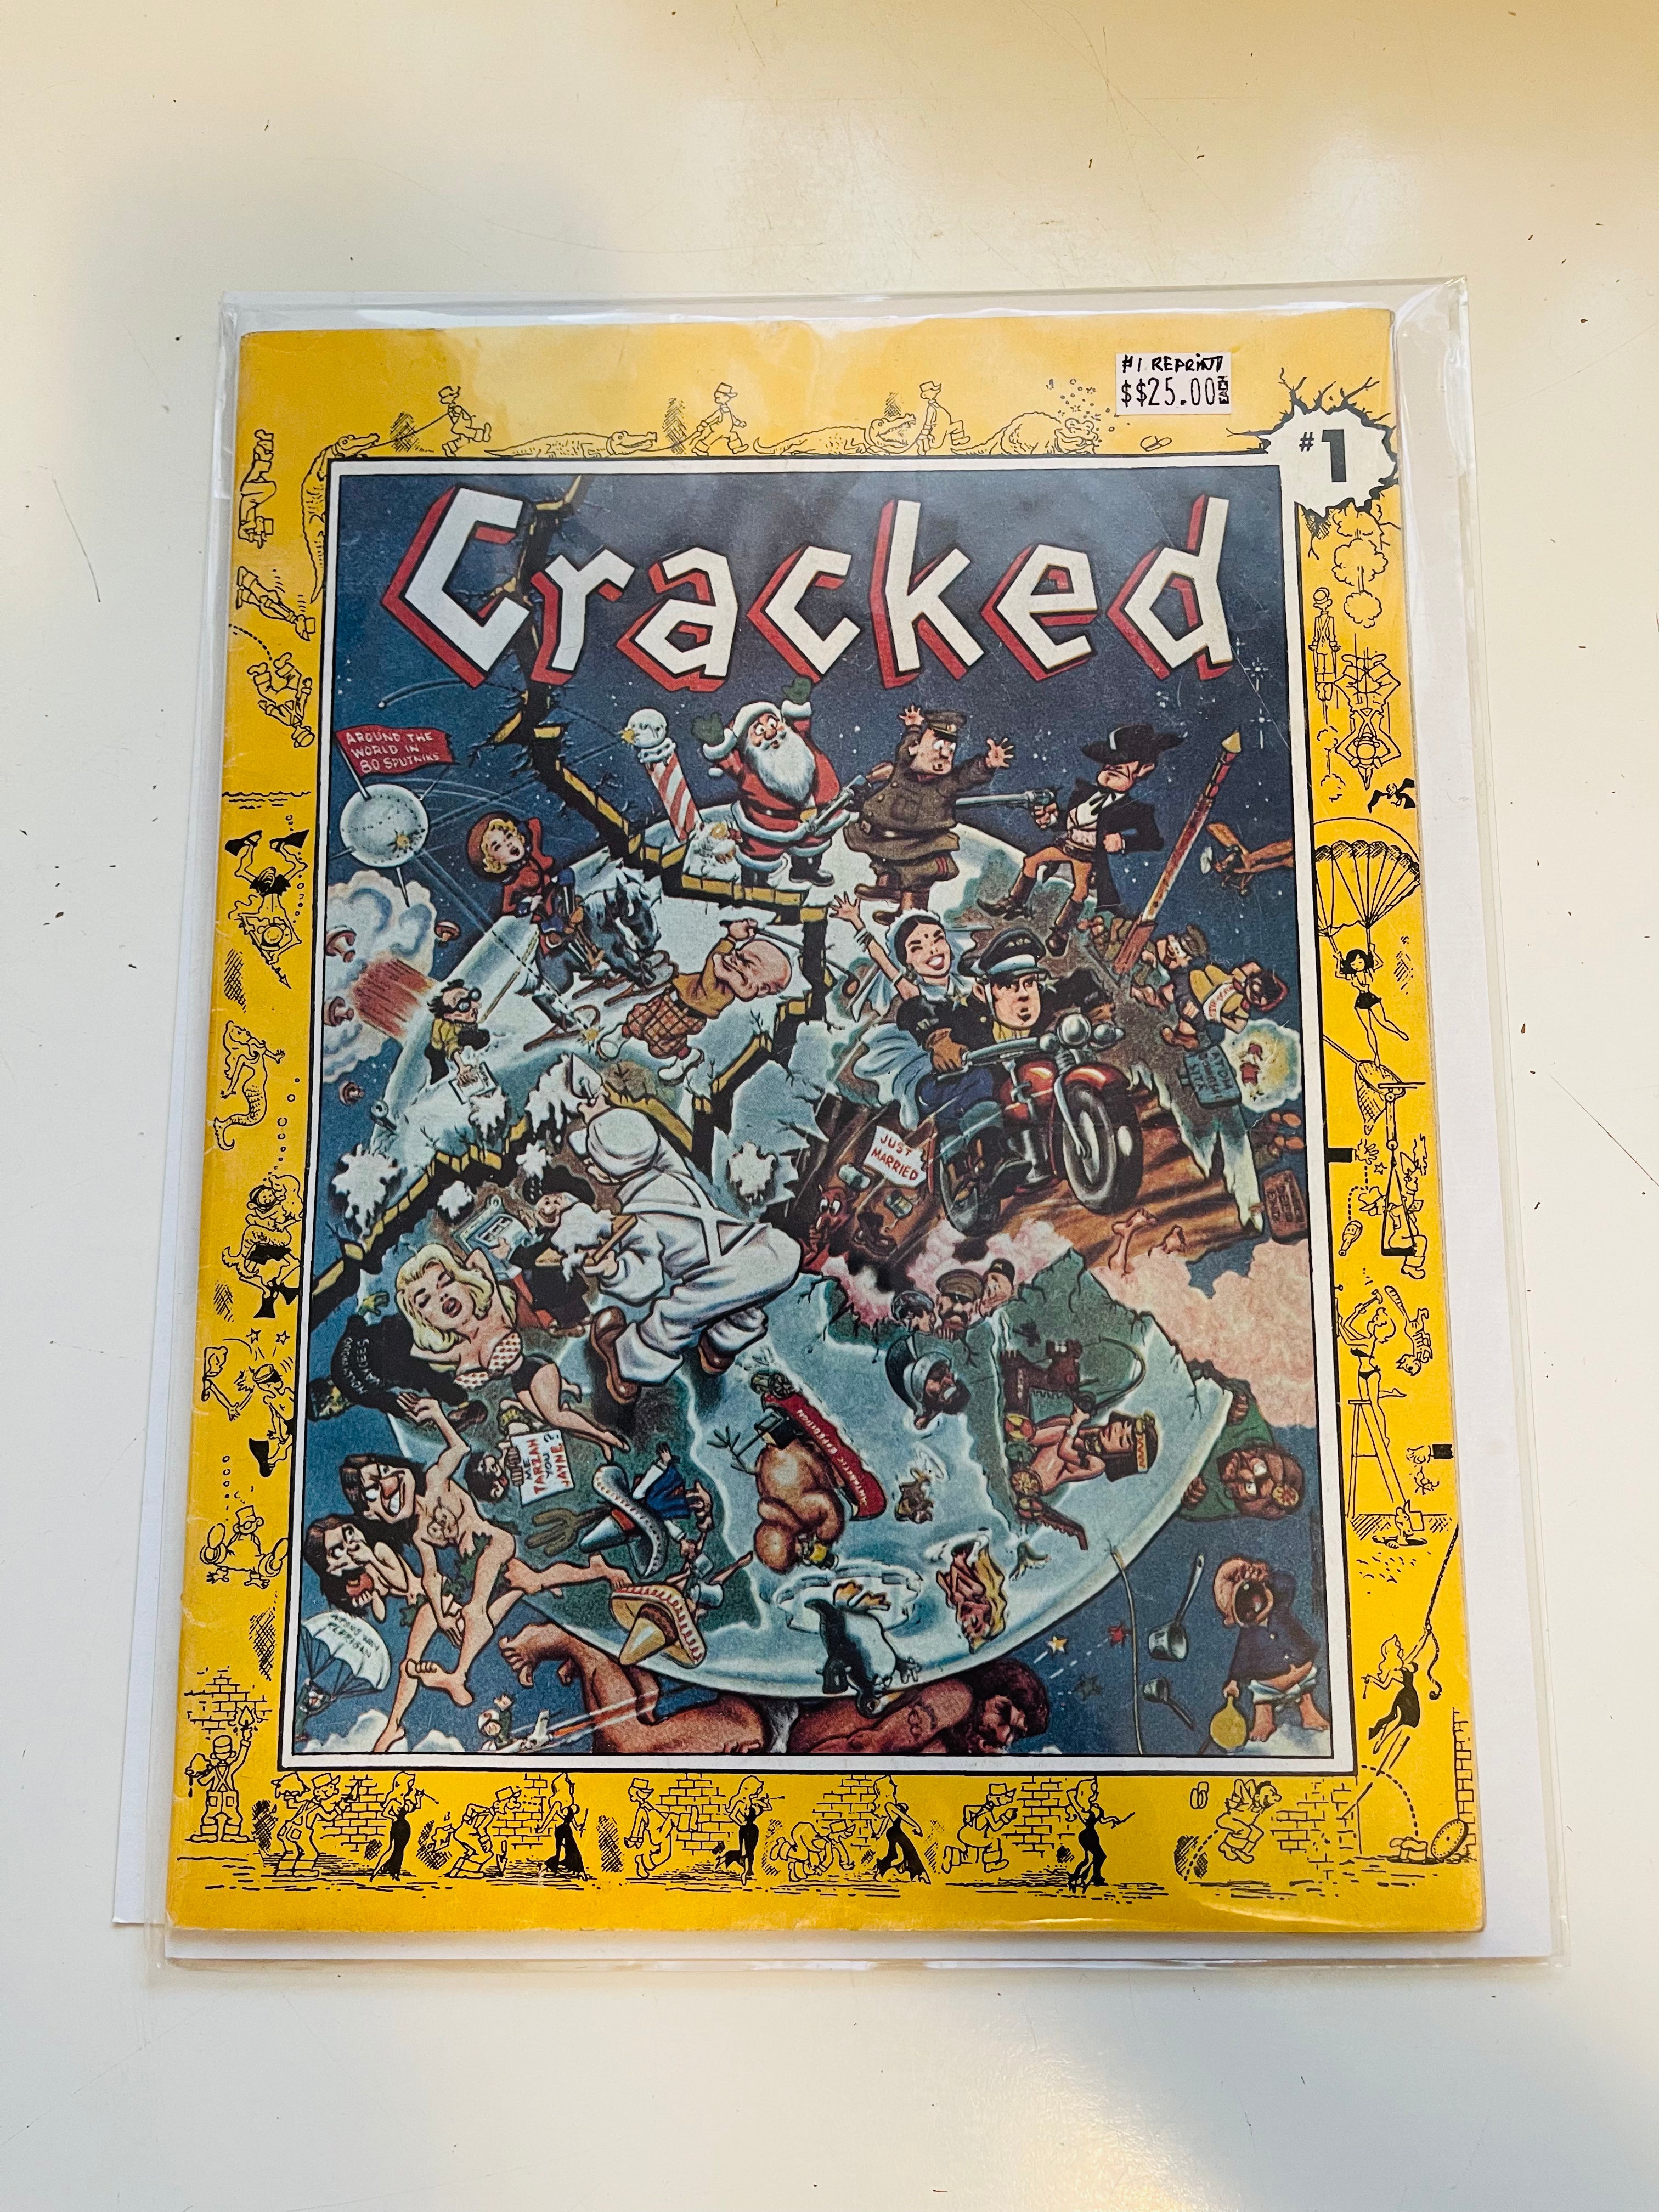 Cracked Magazine #1 rare reprint of the first issue